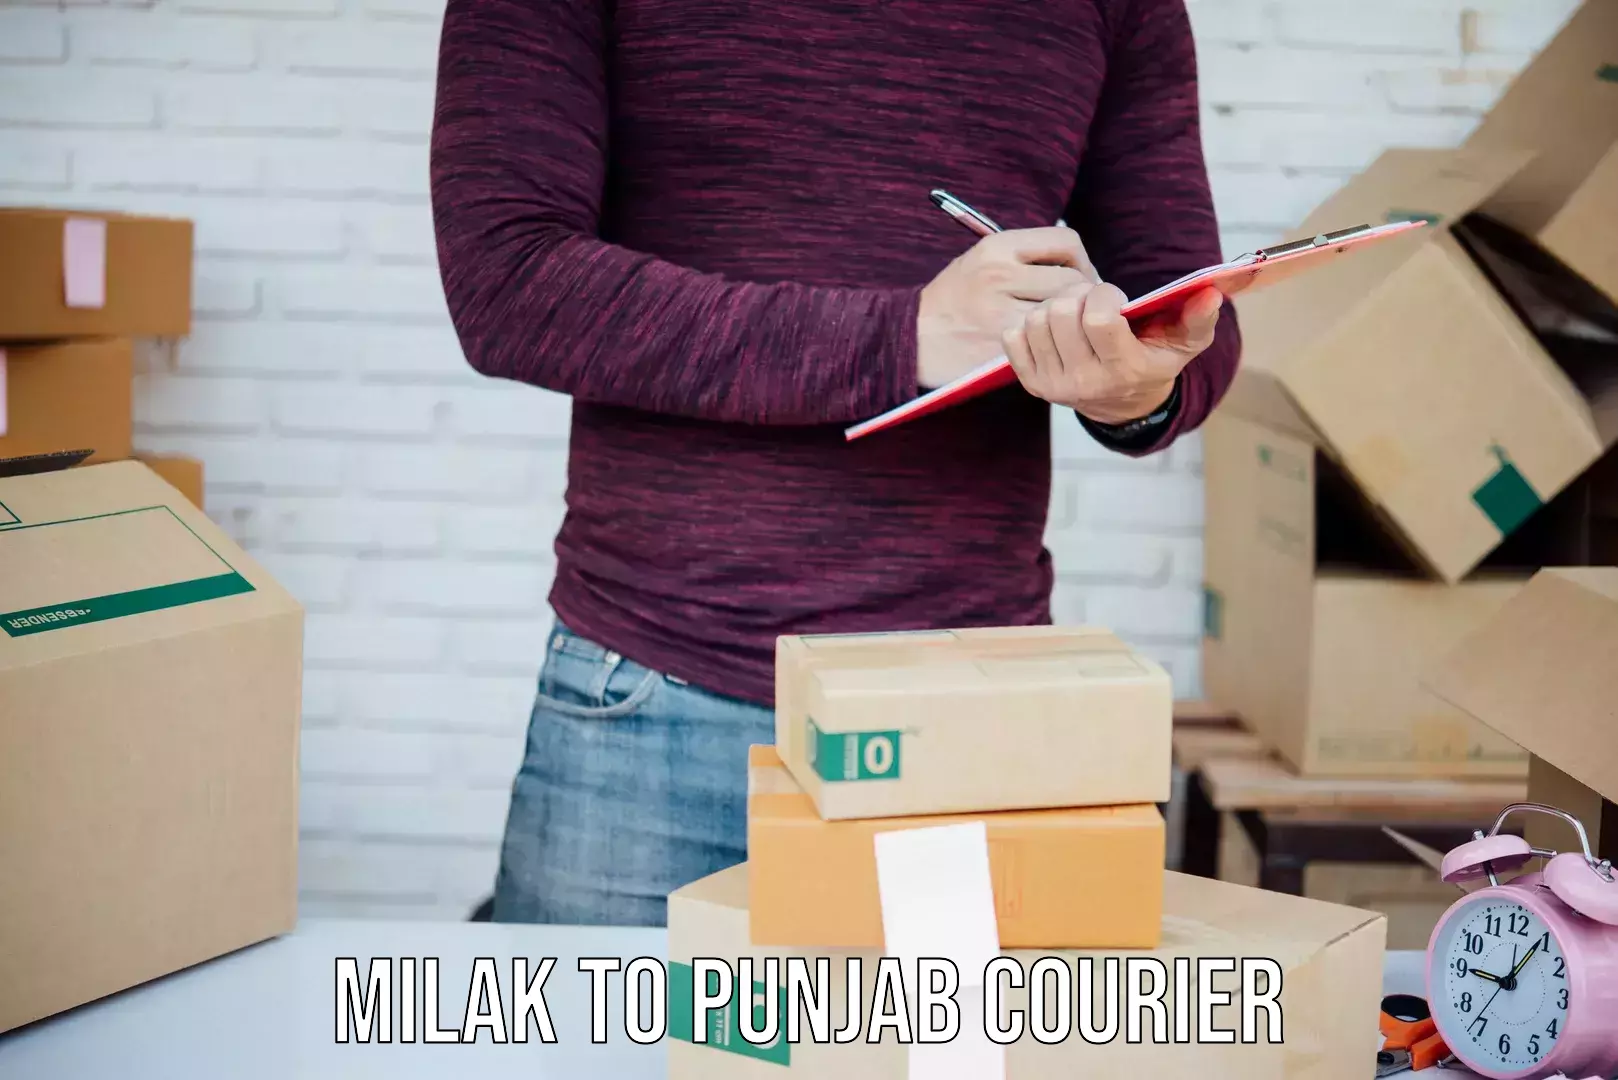 Global courier networks Milak to Punjab